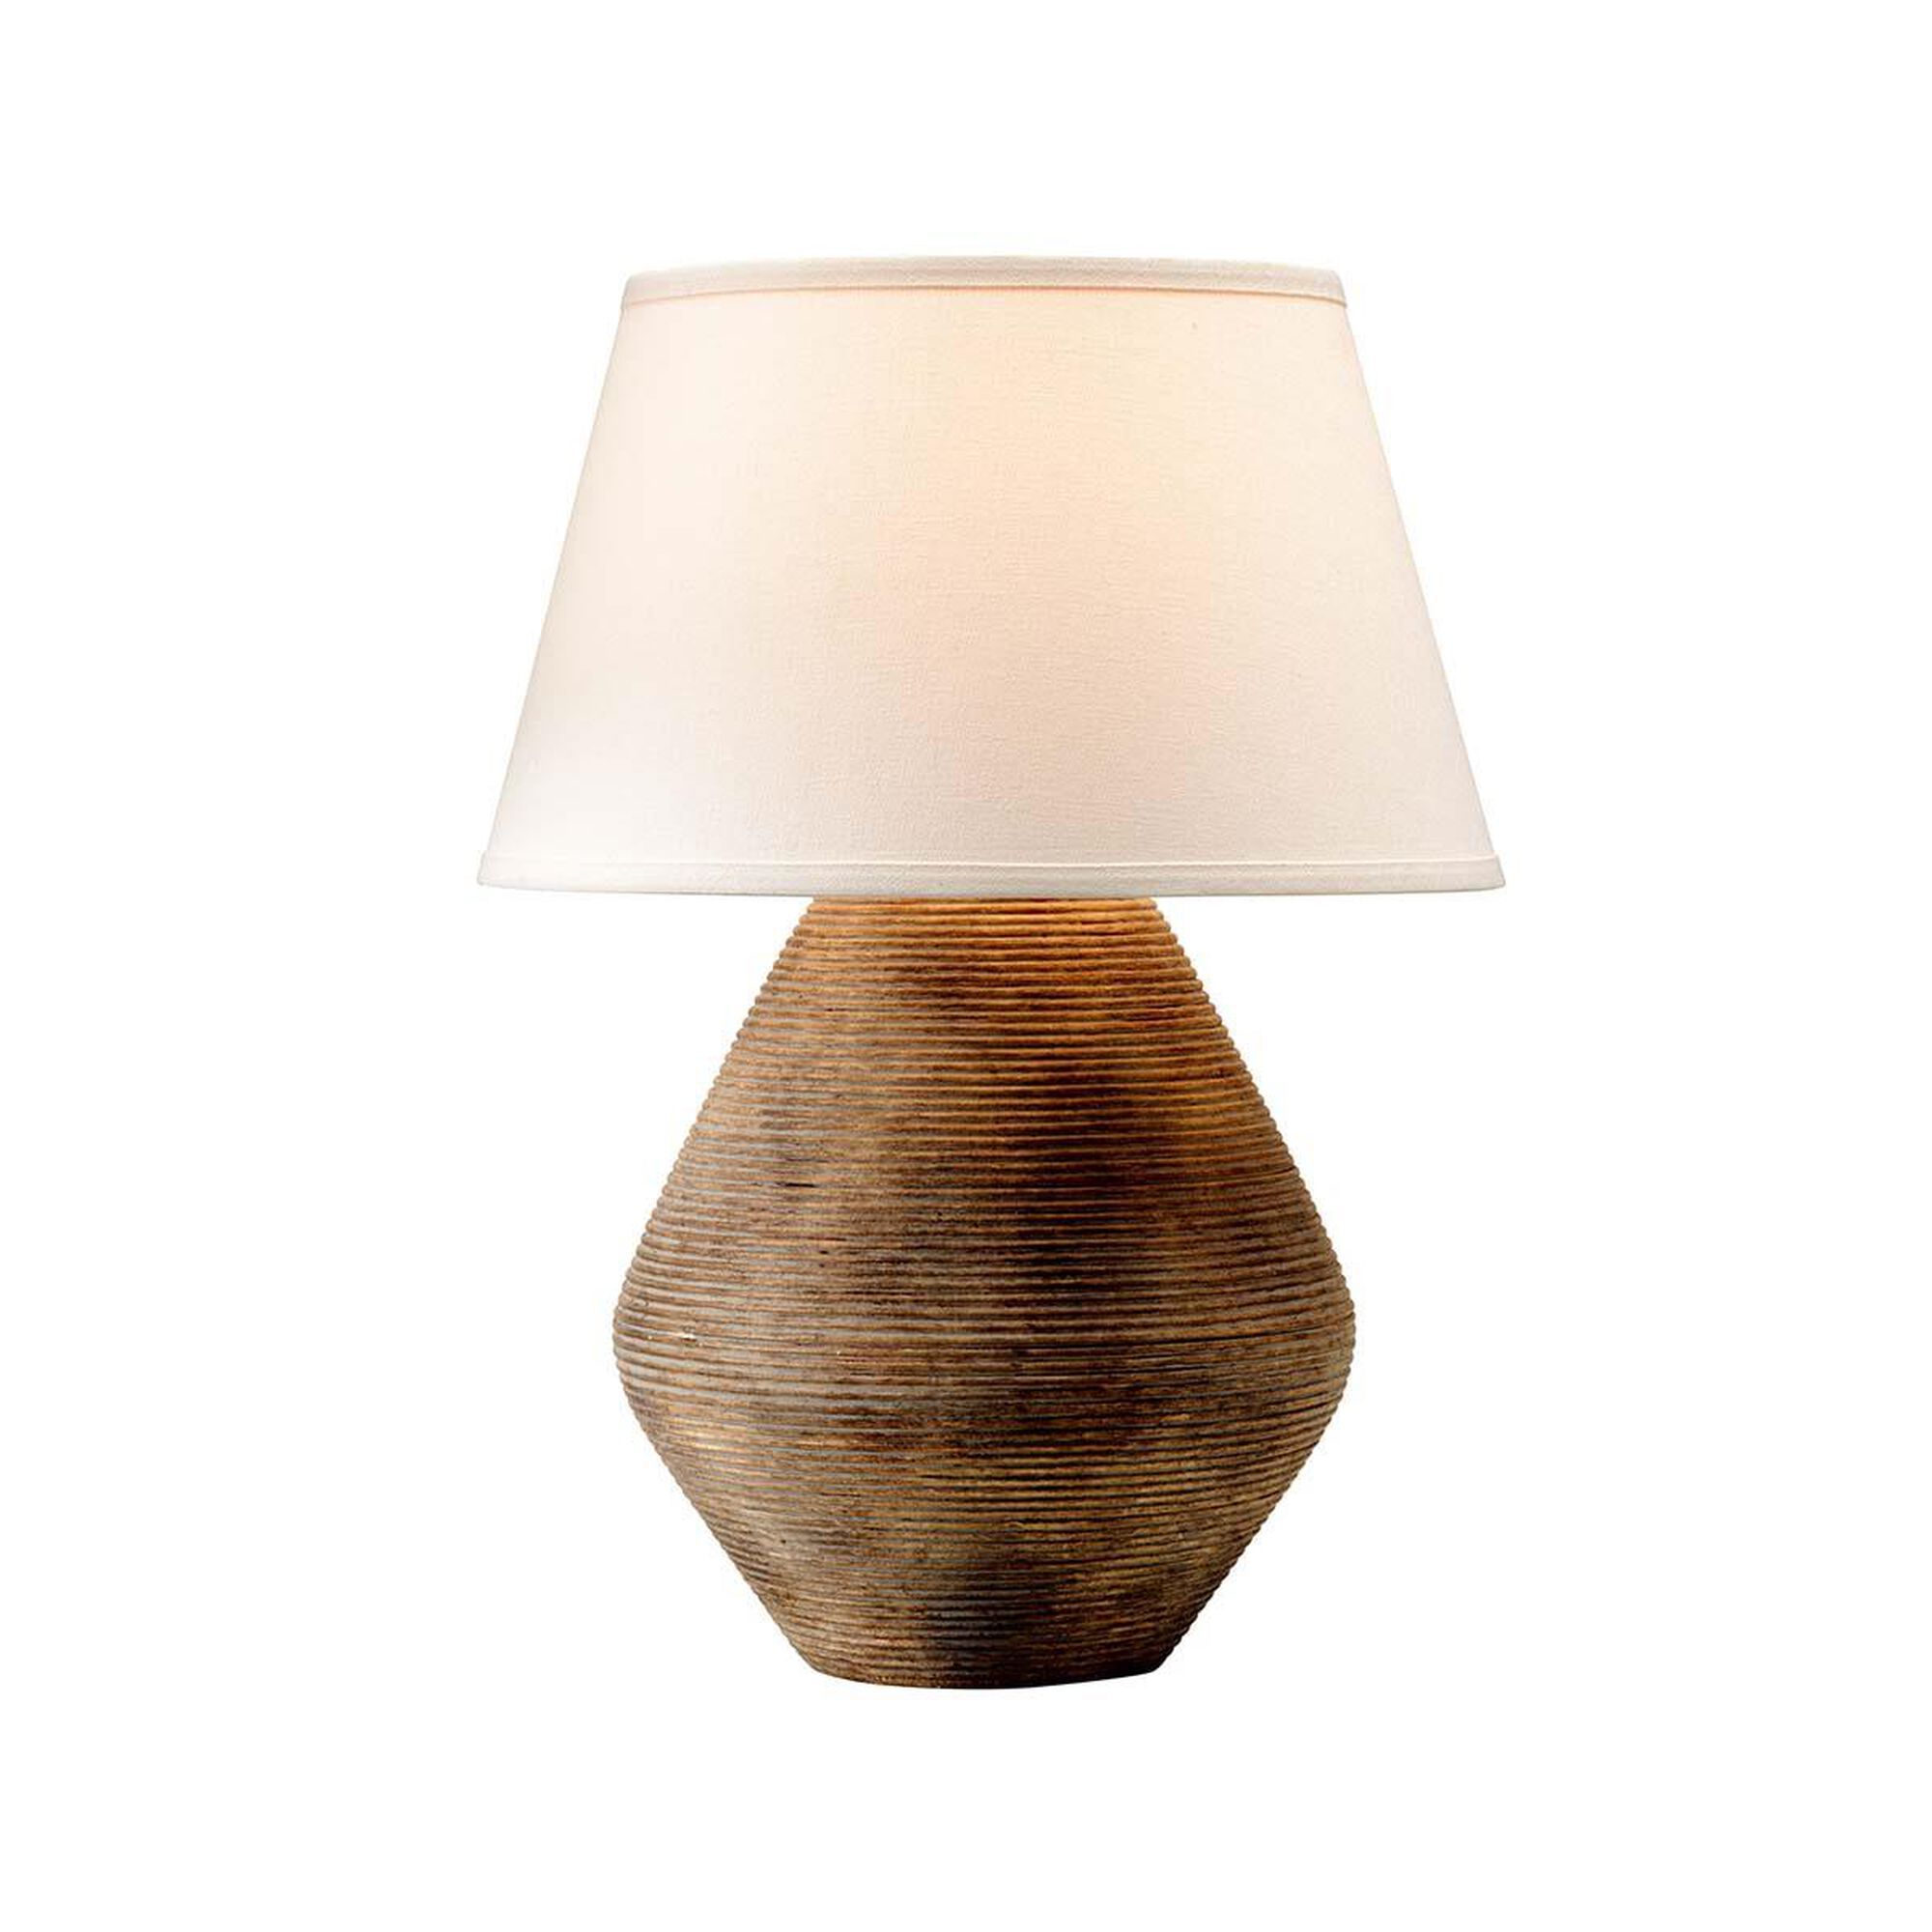 New


Calabria 22 Inch Table Lamp by Troy Lighting

Capitol ID: 2488080
MFR SKU: PTL1011 | Capitol Lighting 1800lighting.com